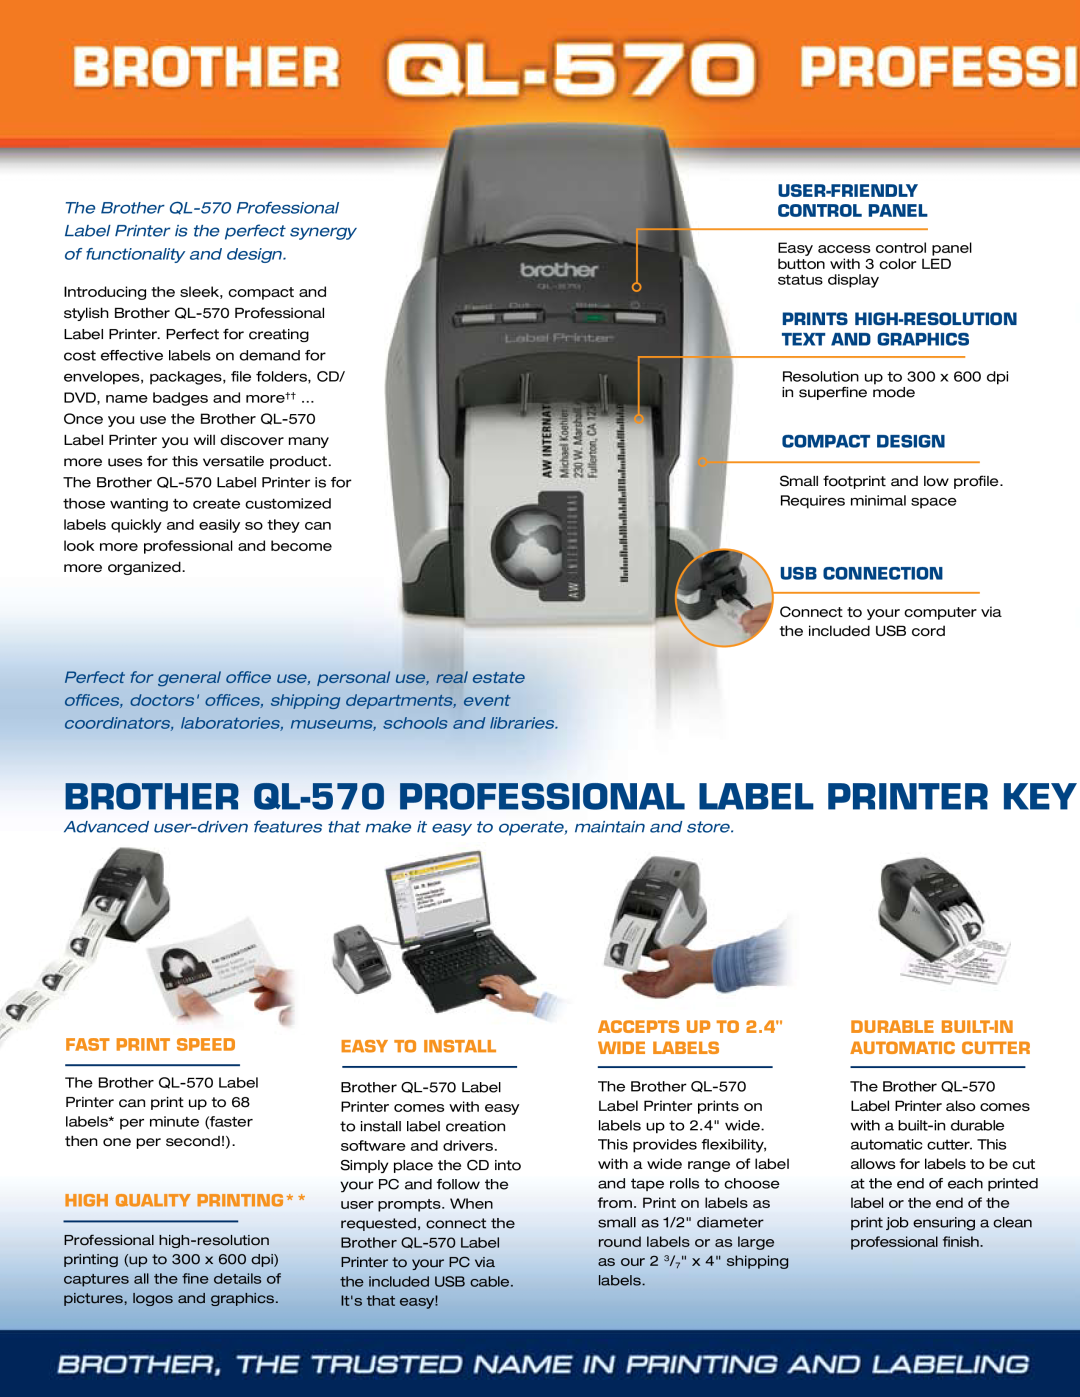 Brother QL570 Brother QL-570 professional Label Printer Key, fast print speed, Easy to install, Accepts up to, Wide Labels 